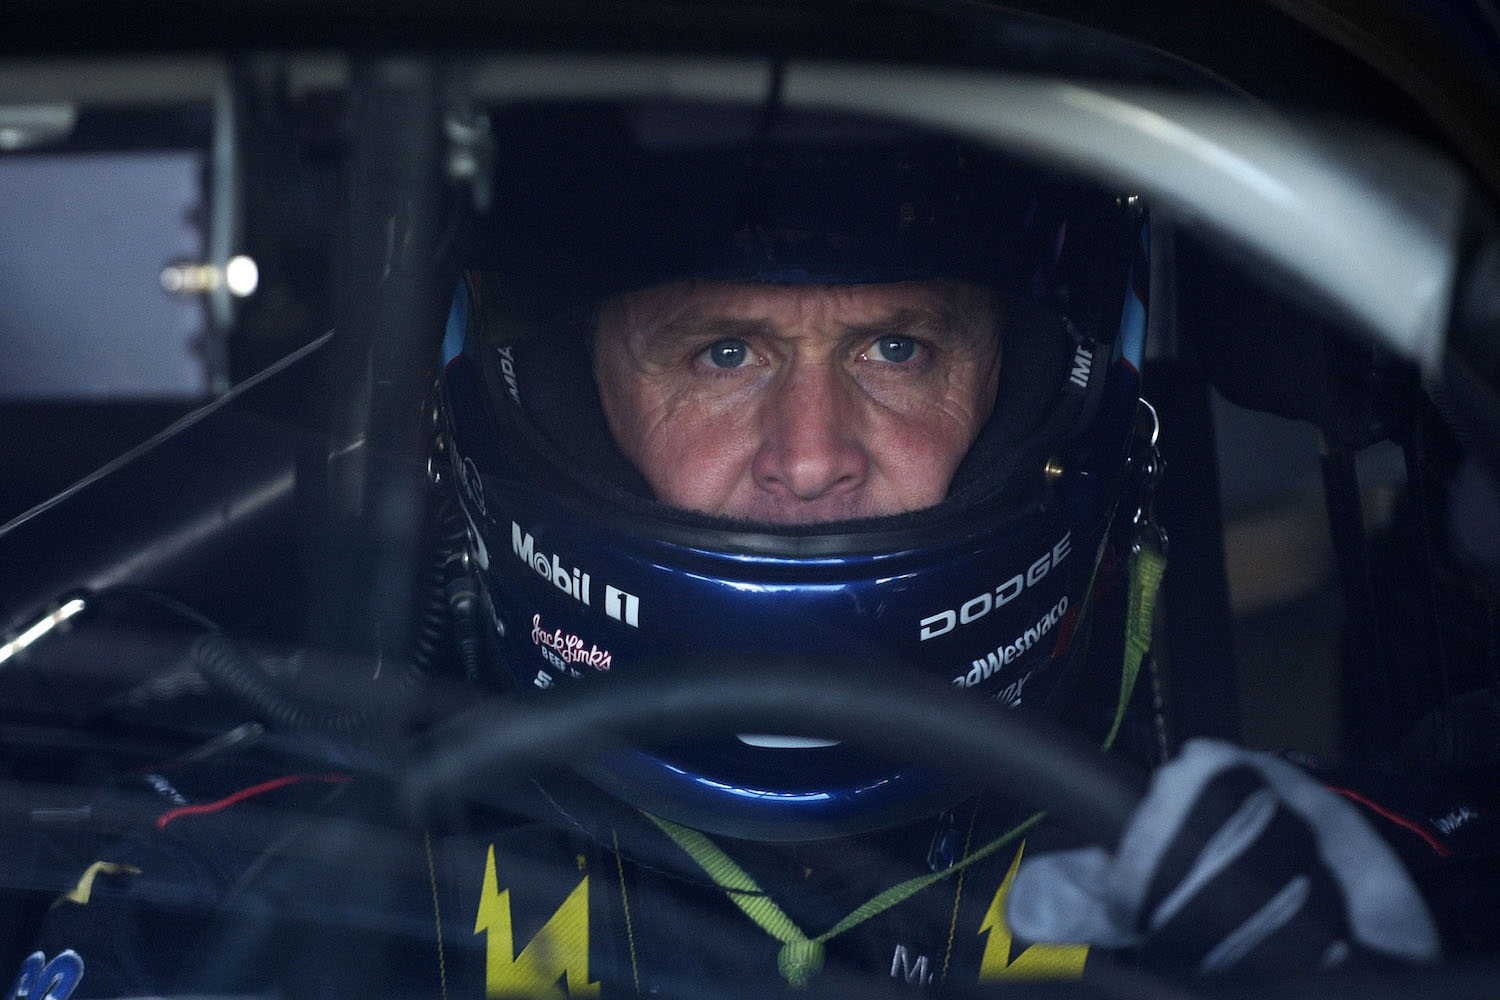 NASCAR driver Rusty Wallace is behind the wheel of a race car with his helmet.